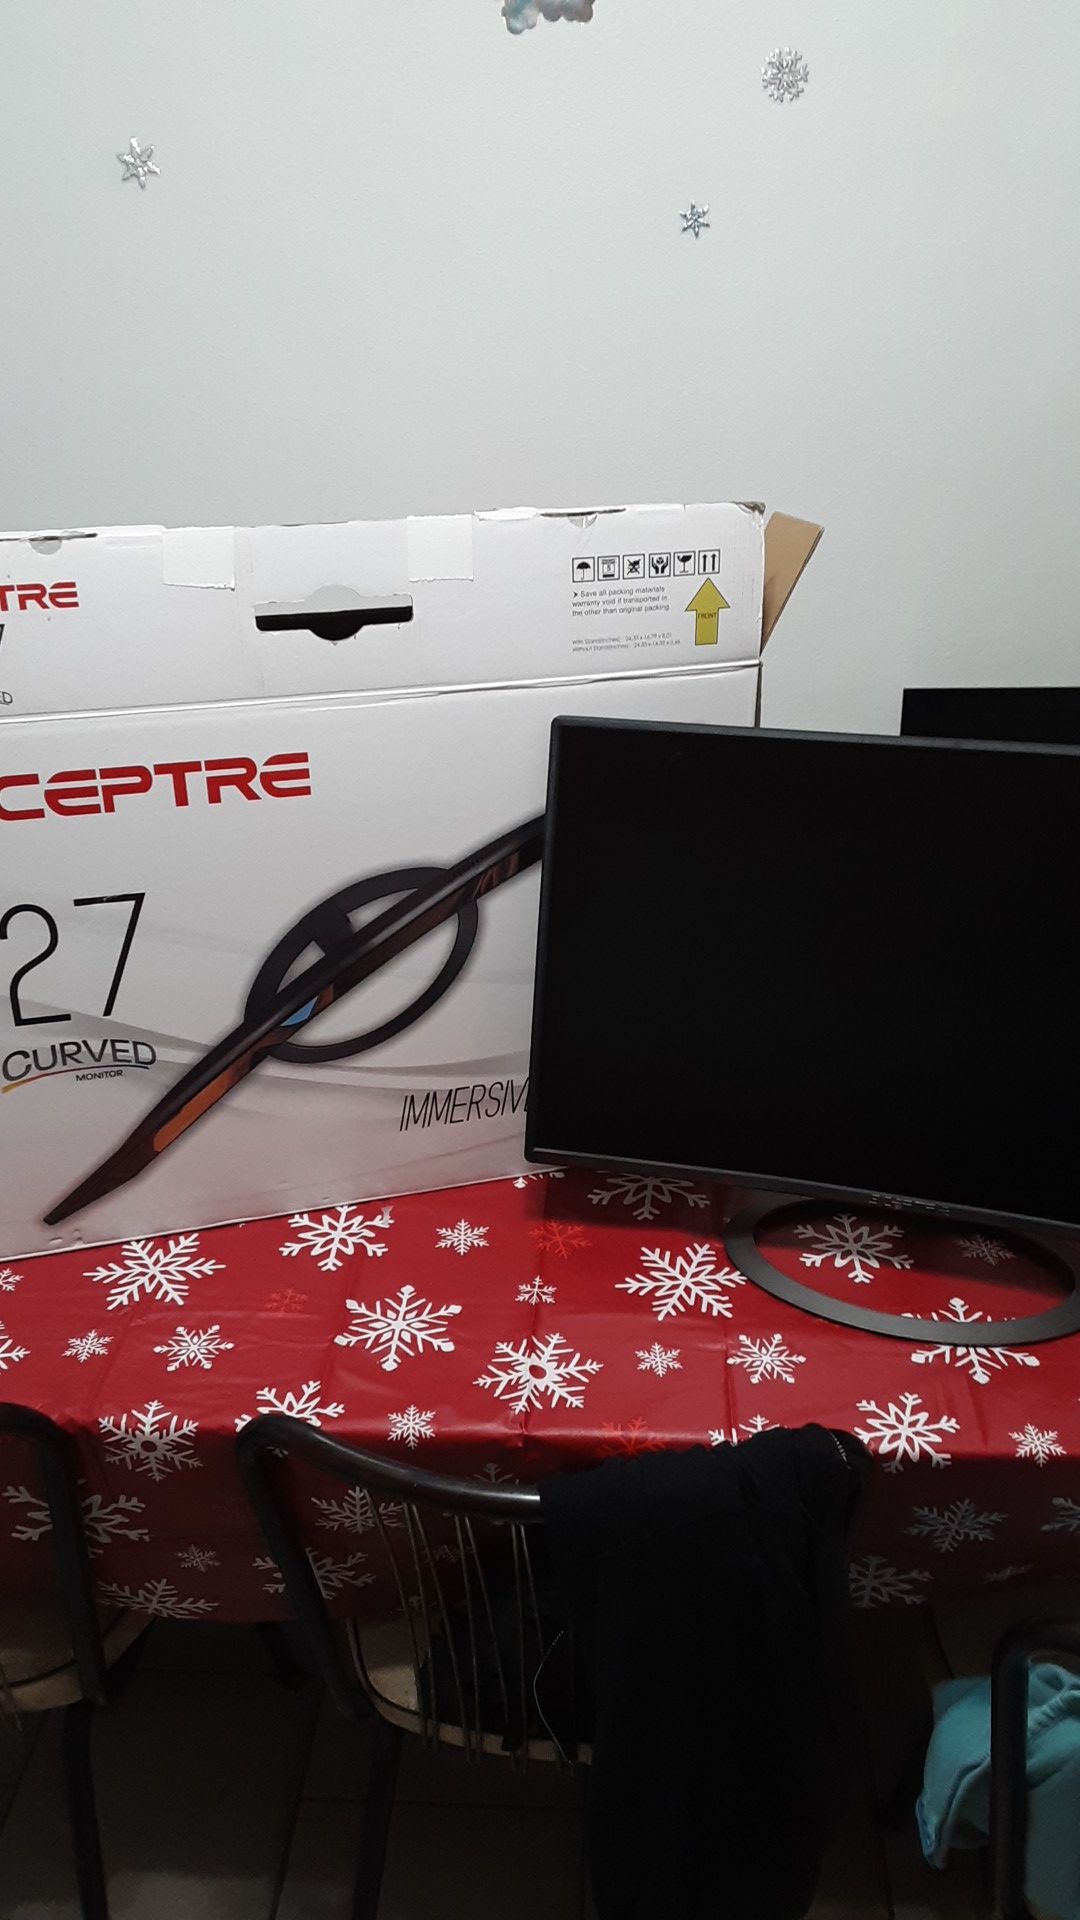 Sceptre curved computer monitor